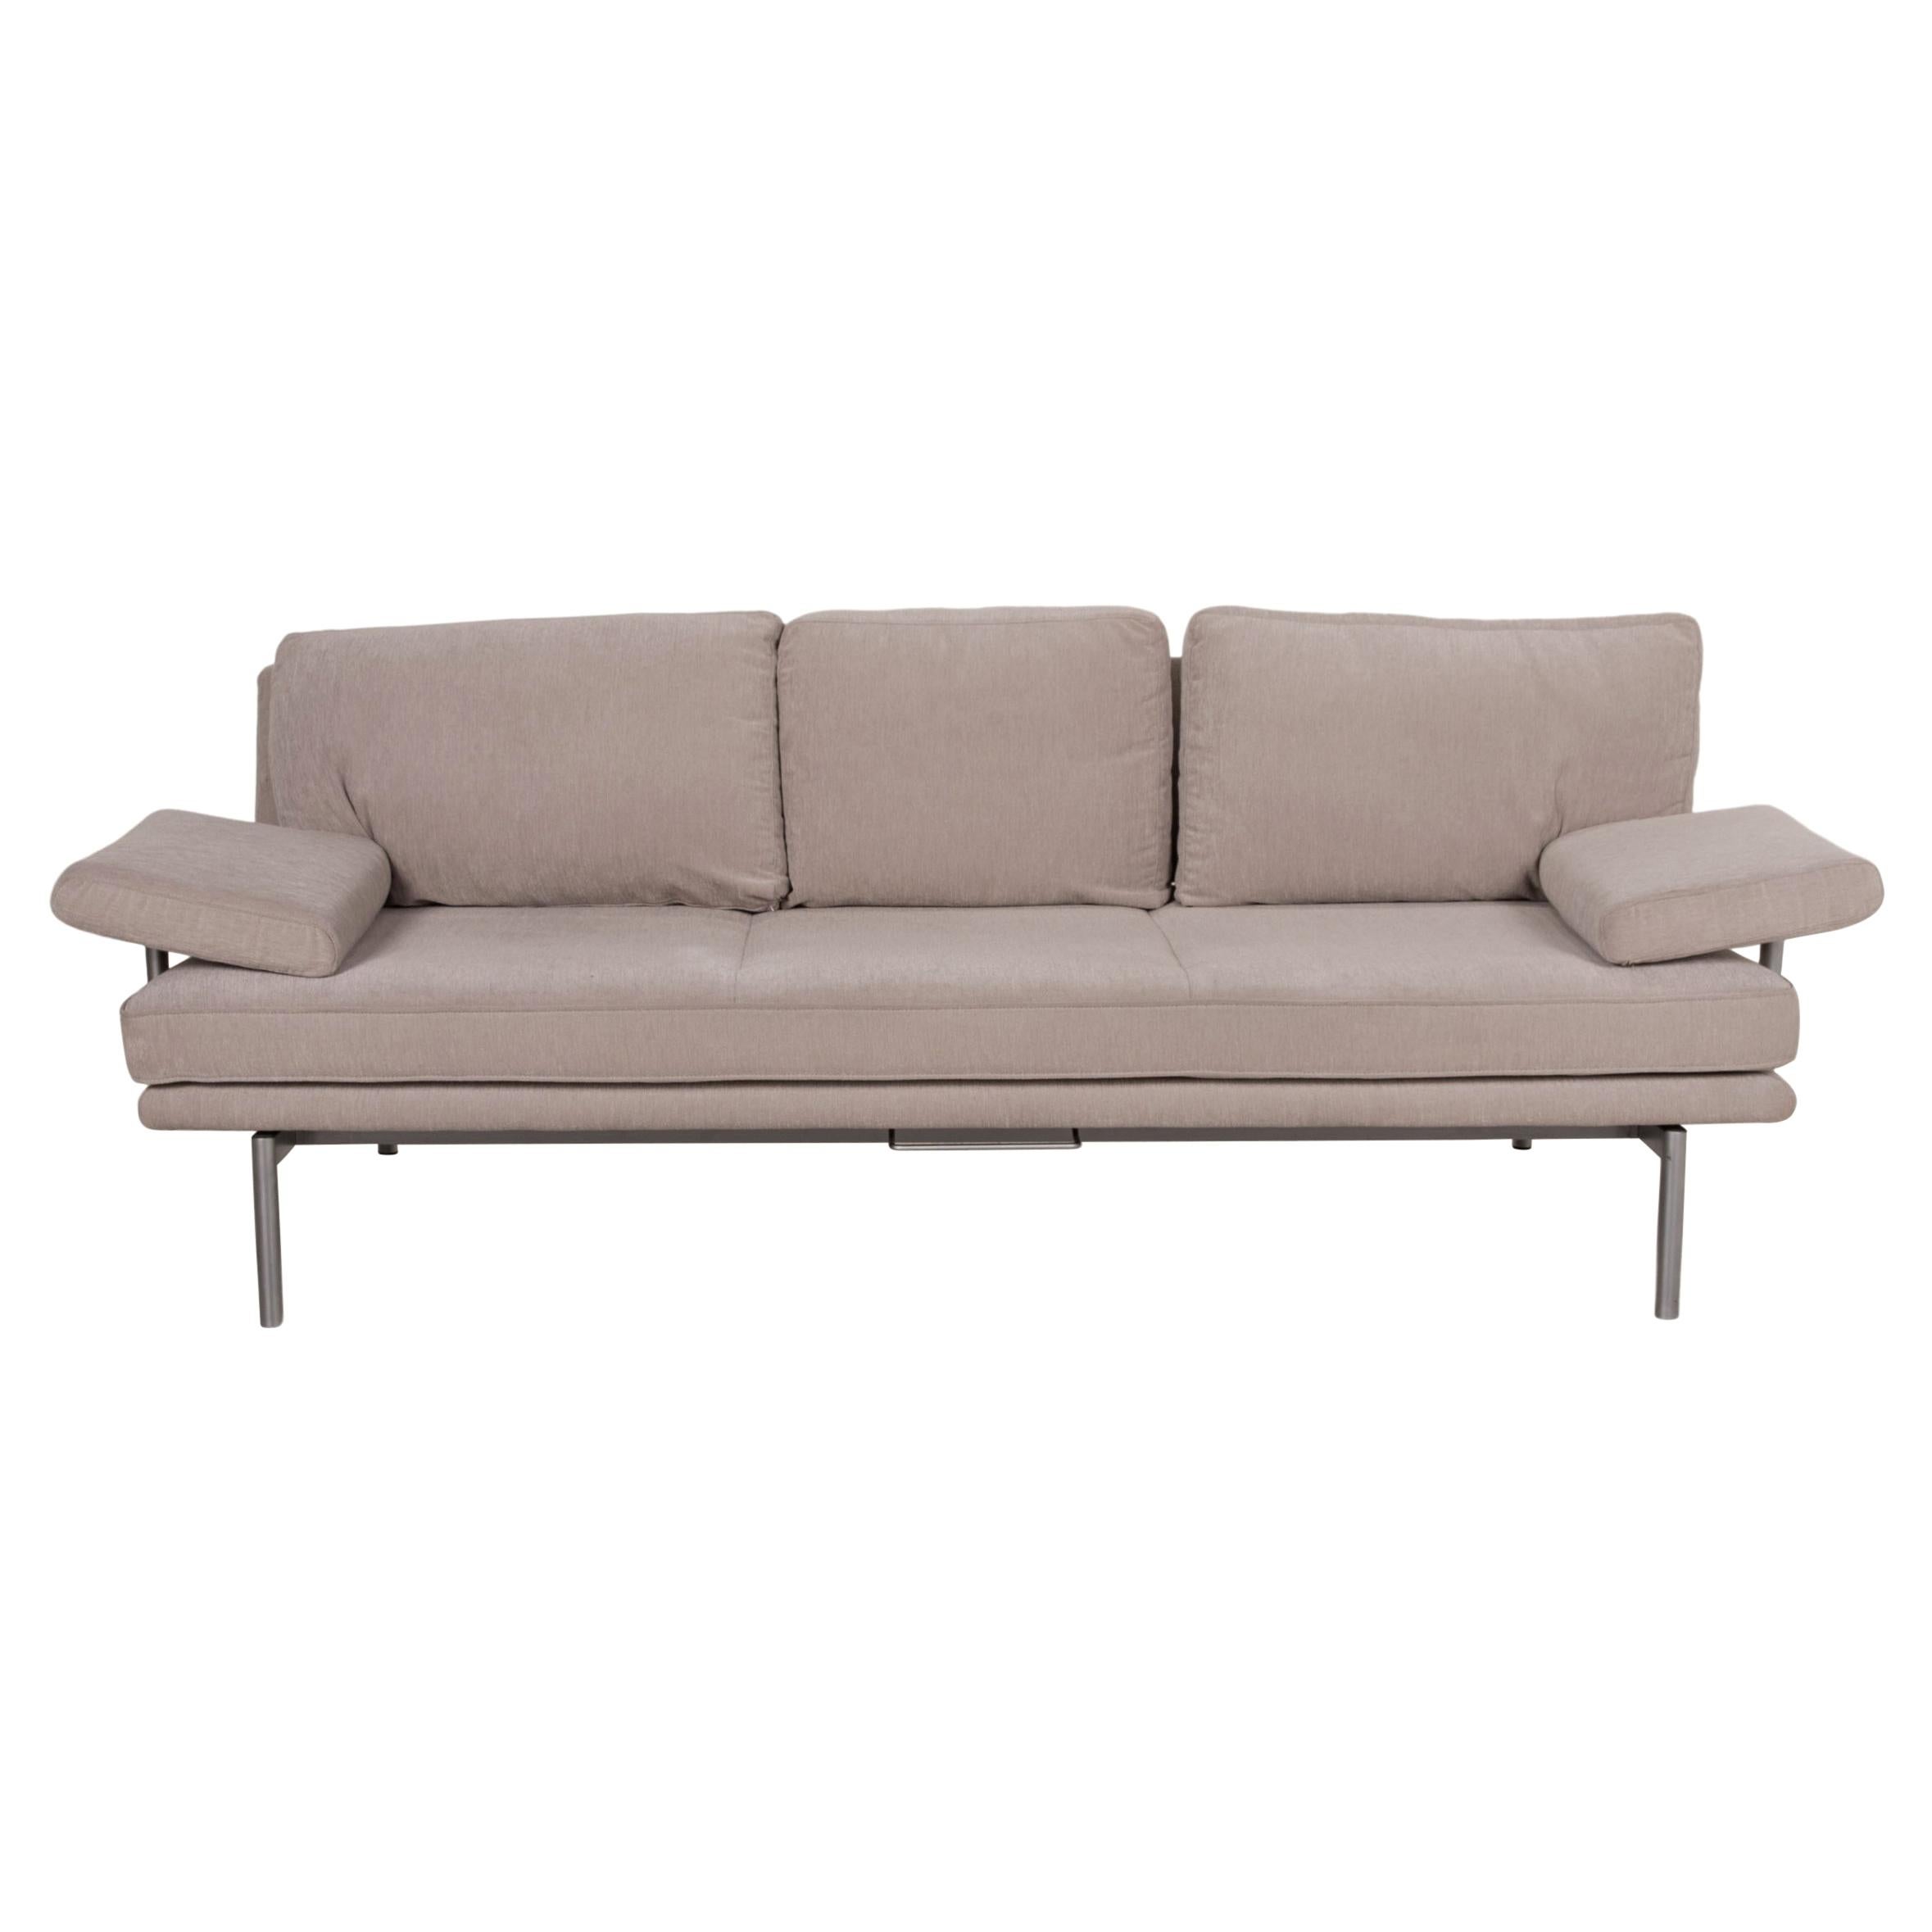 Walter Knoll Living Platform Fabric Sofa Gray Three-Seater Couch For Sale